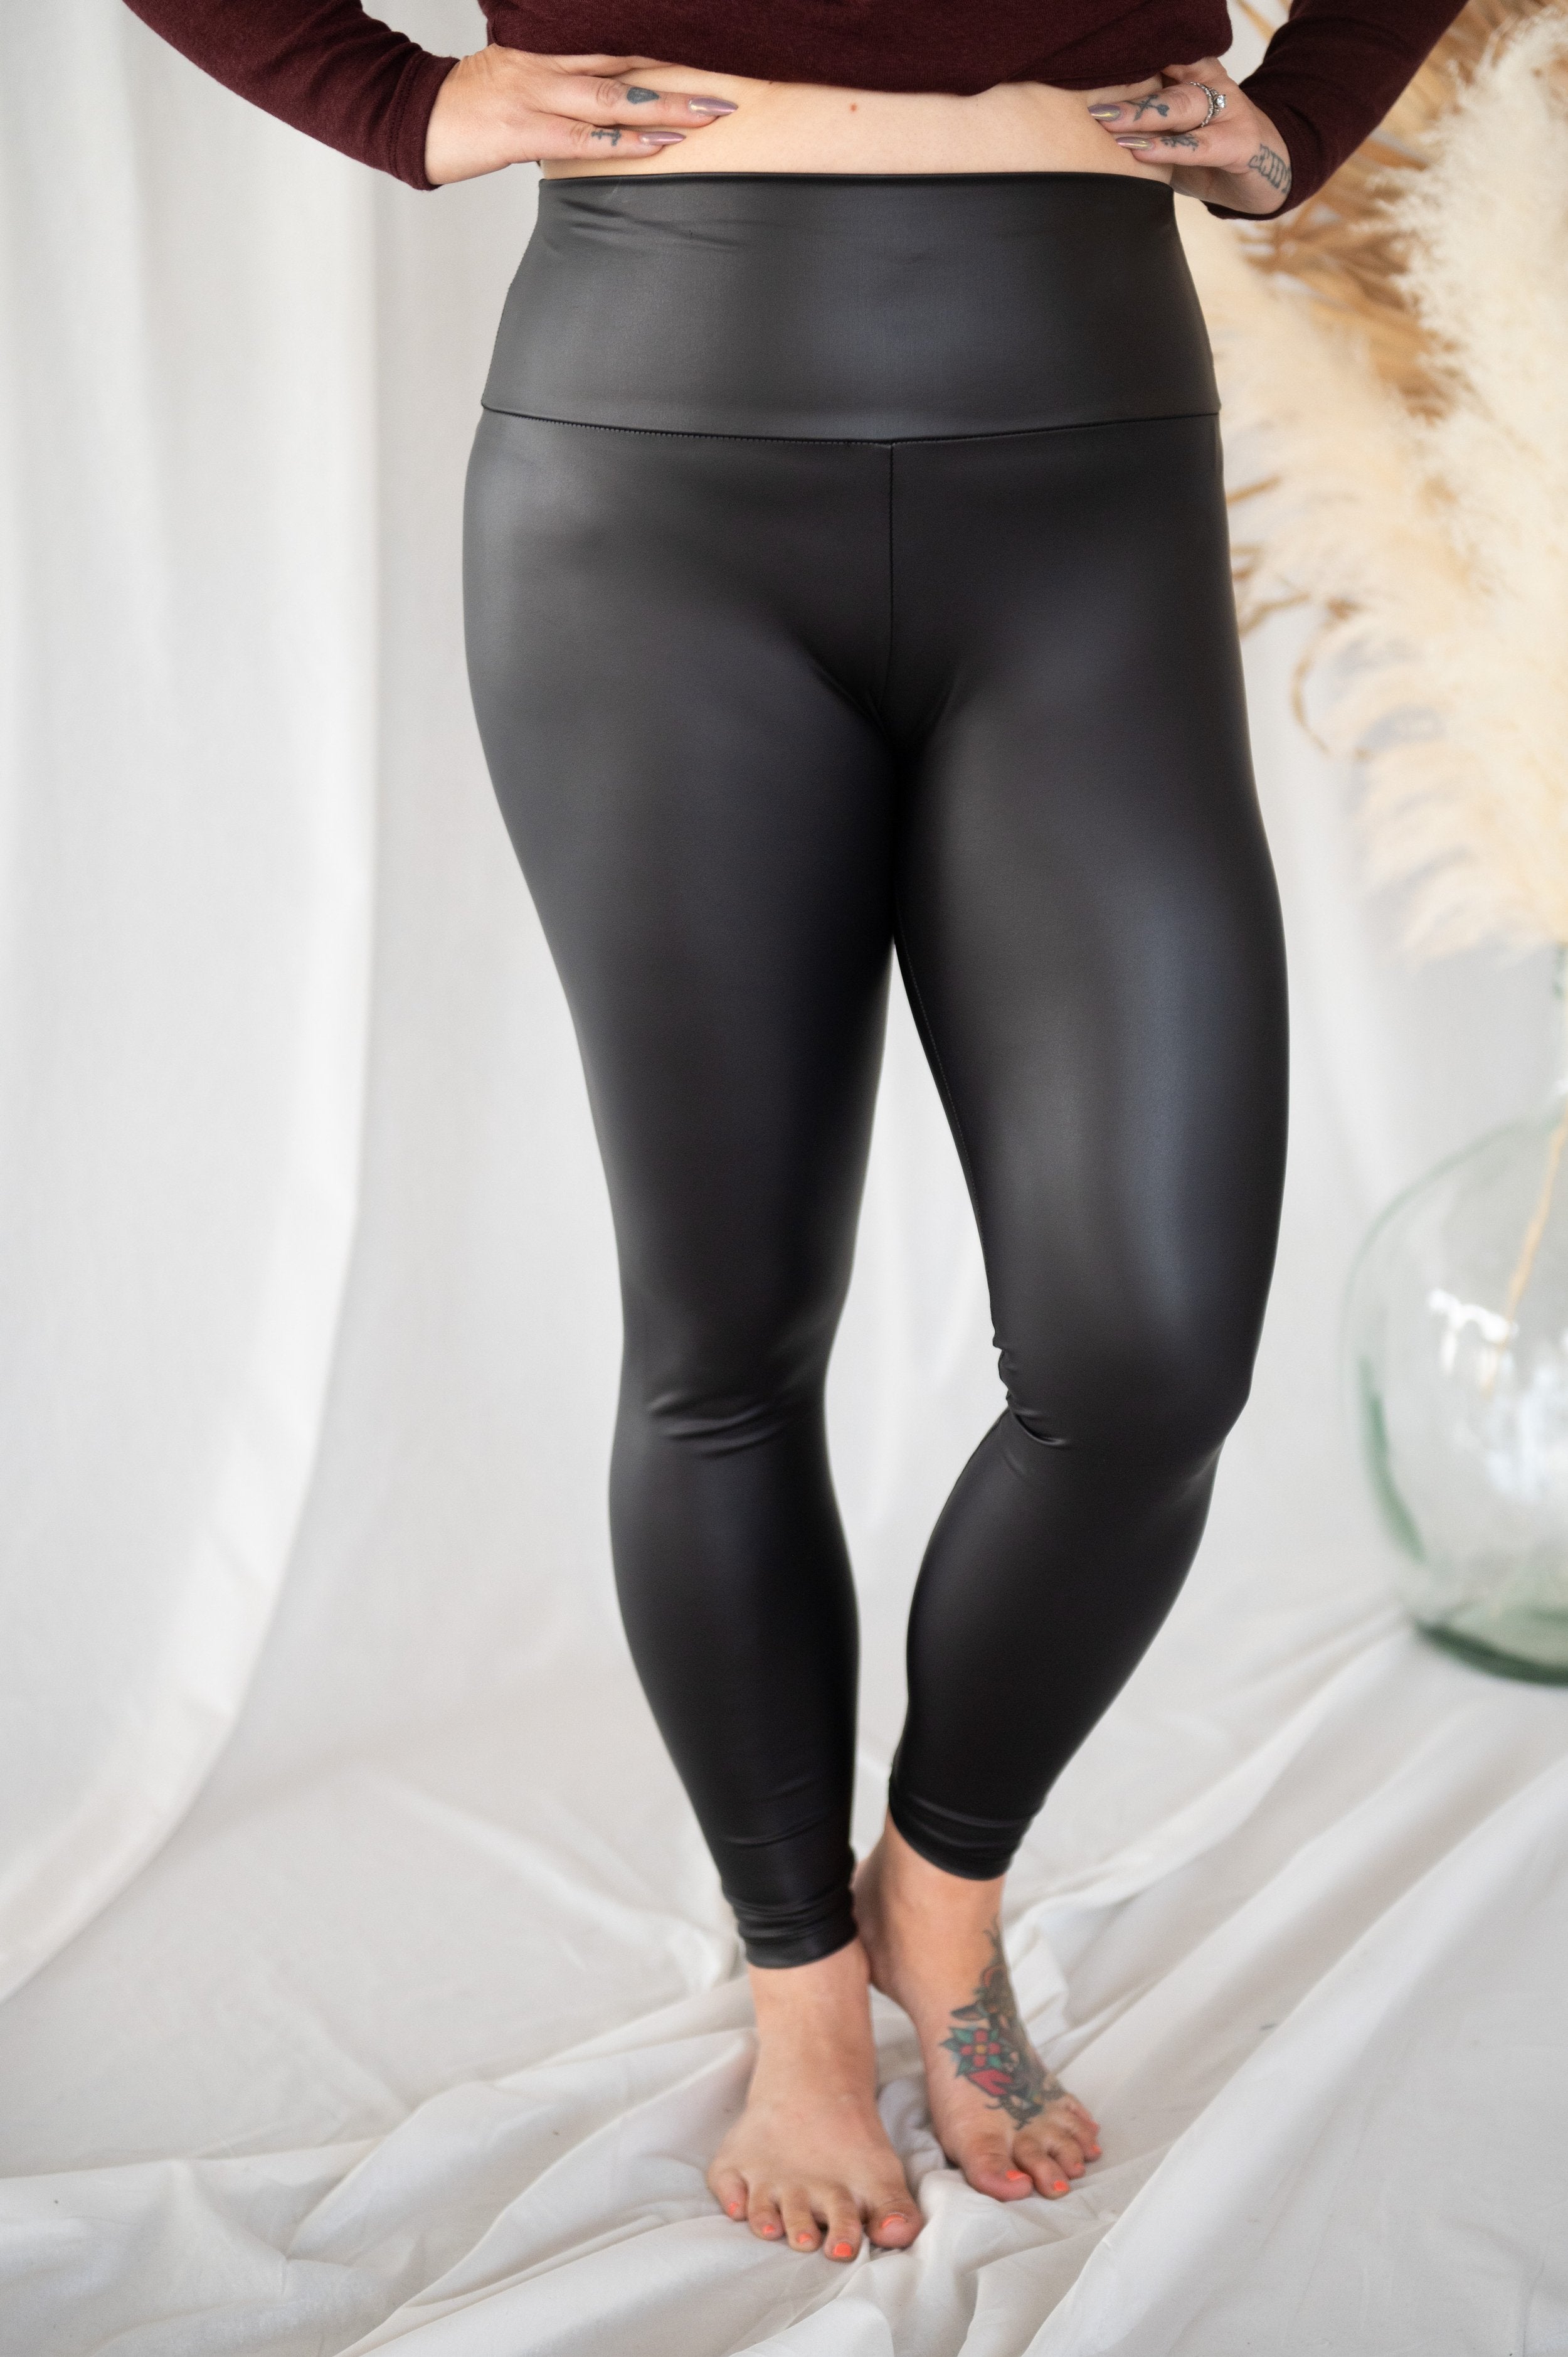 Leather Like Legging Pants - From Marleylilly